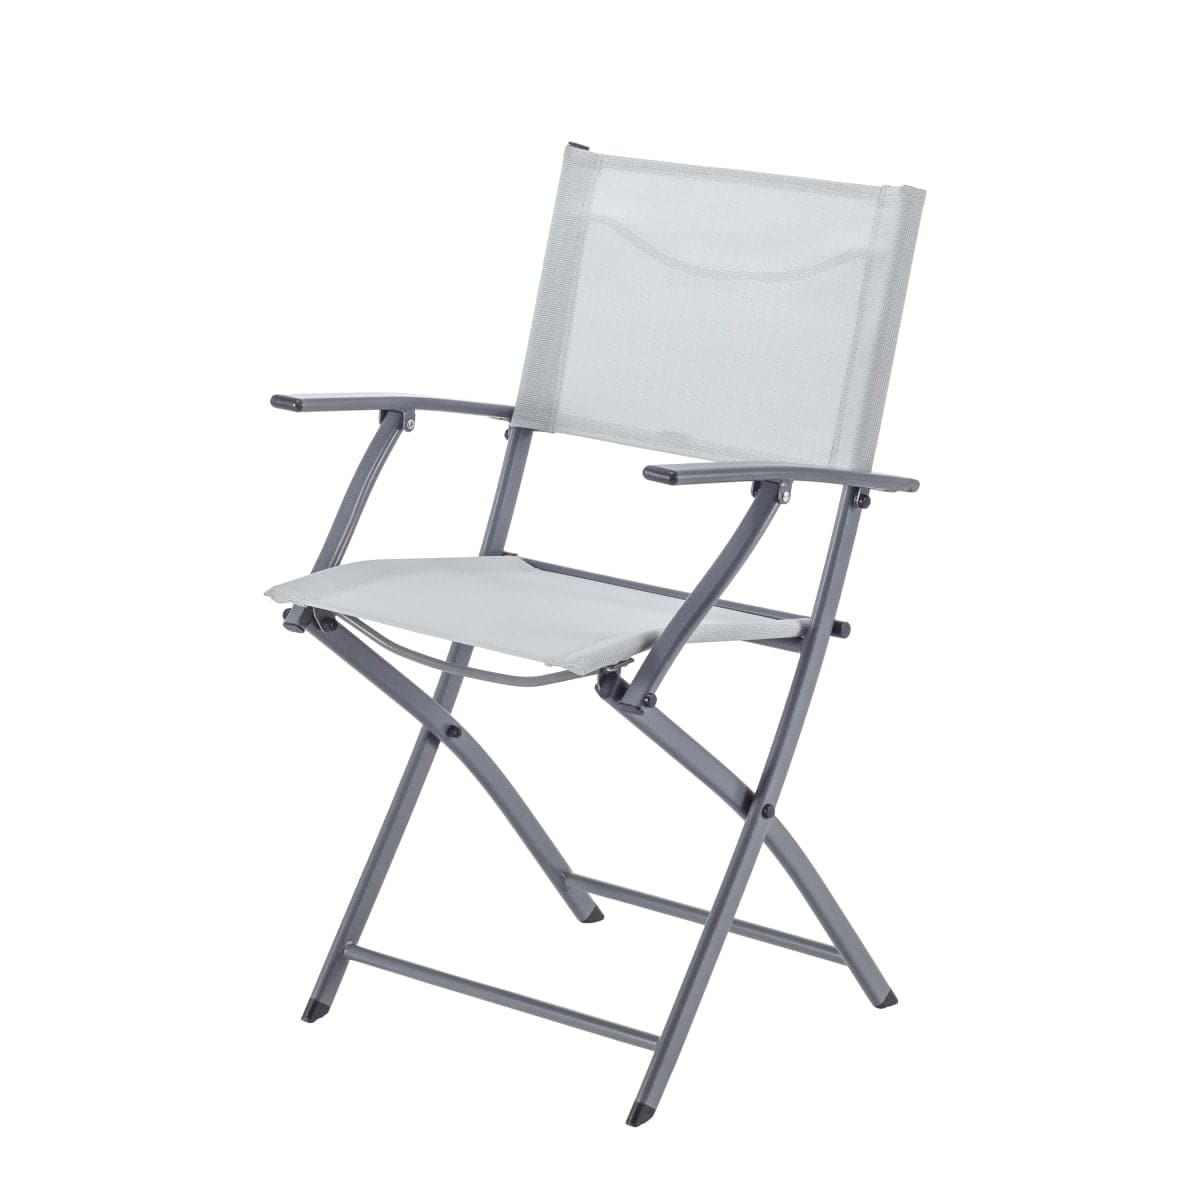 EMYS NATERIAL FOLDING STEEL CHAIR WITH ARMRESTS TEXTILENE SEAT GREY 52X54XH83 - best price from Maltashopper.com BR500009519